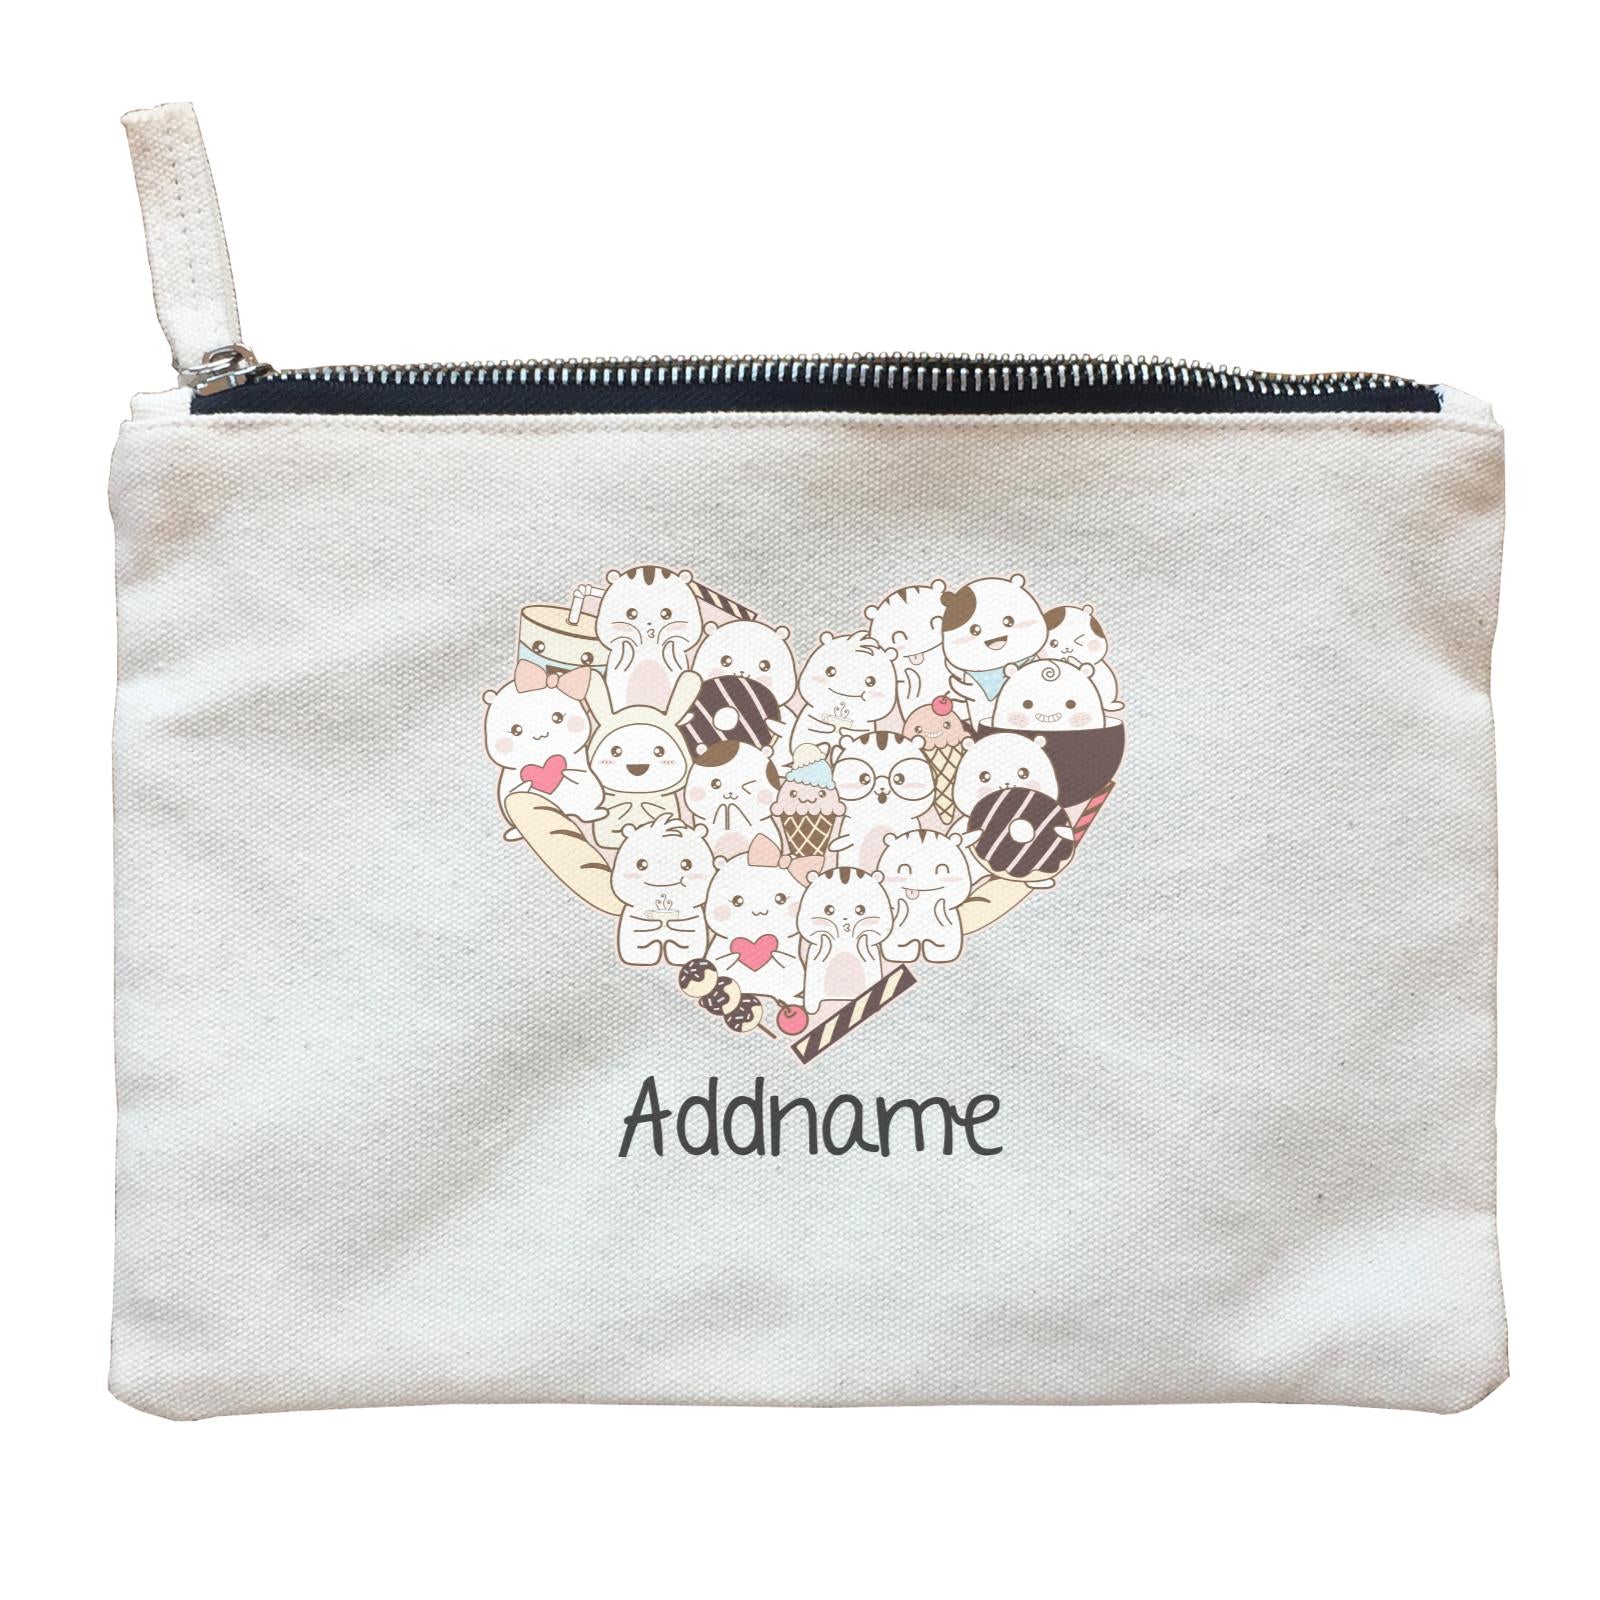 Cute Animals And Friends Series Cute Hamster Group Heart Addname Zipper Pouch